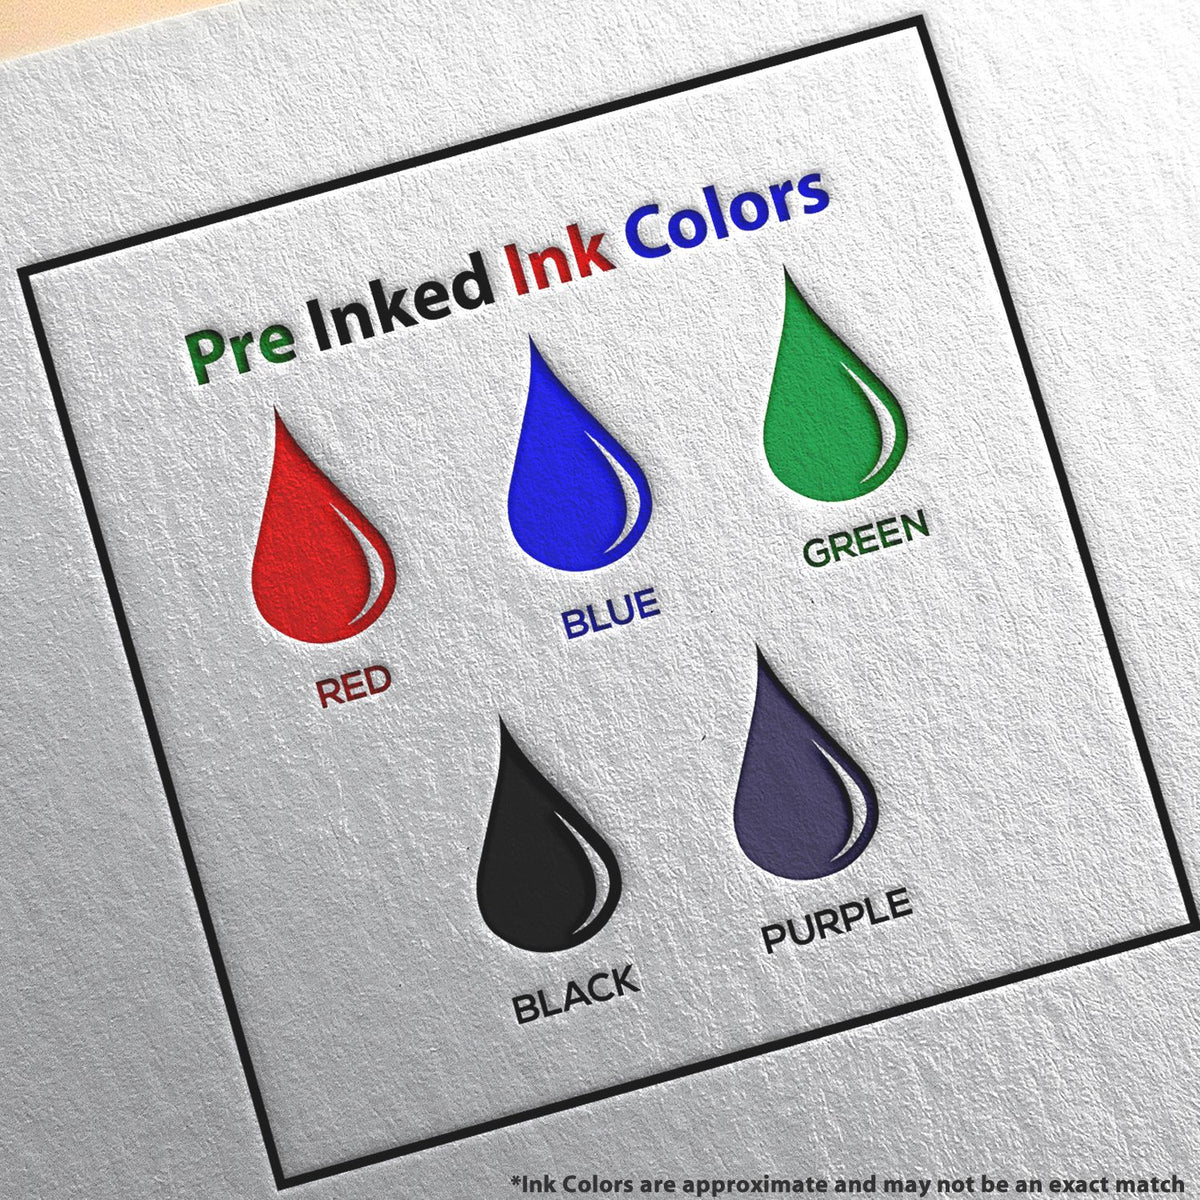 A picture showing the different ink colors or hues available for the MaxLight Premium Pre-Inked South Dakota Rectangular Notarial Stamp product.